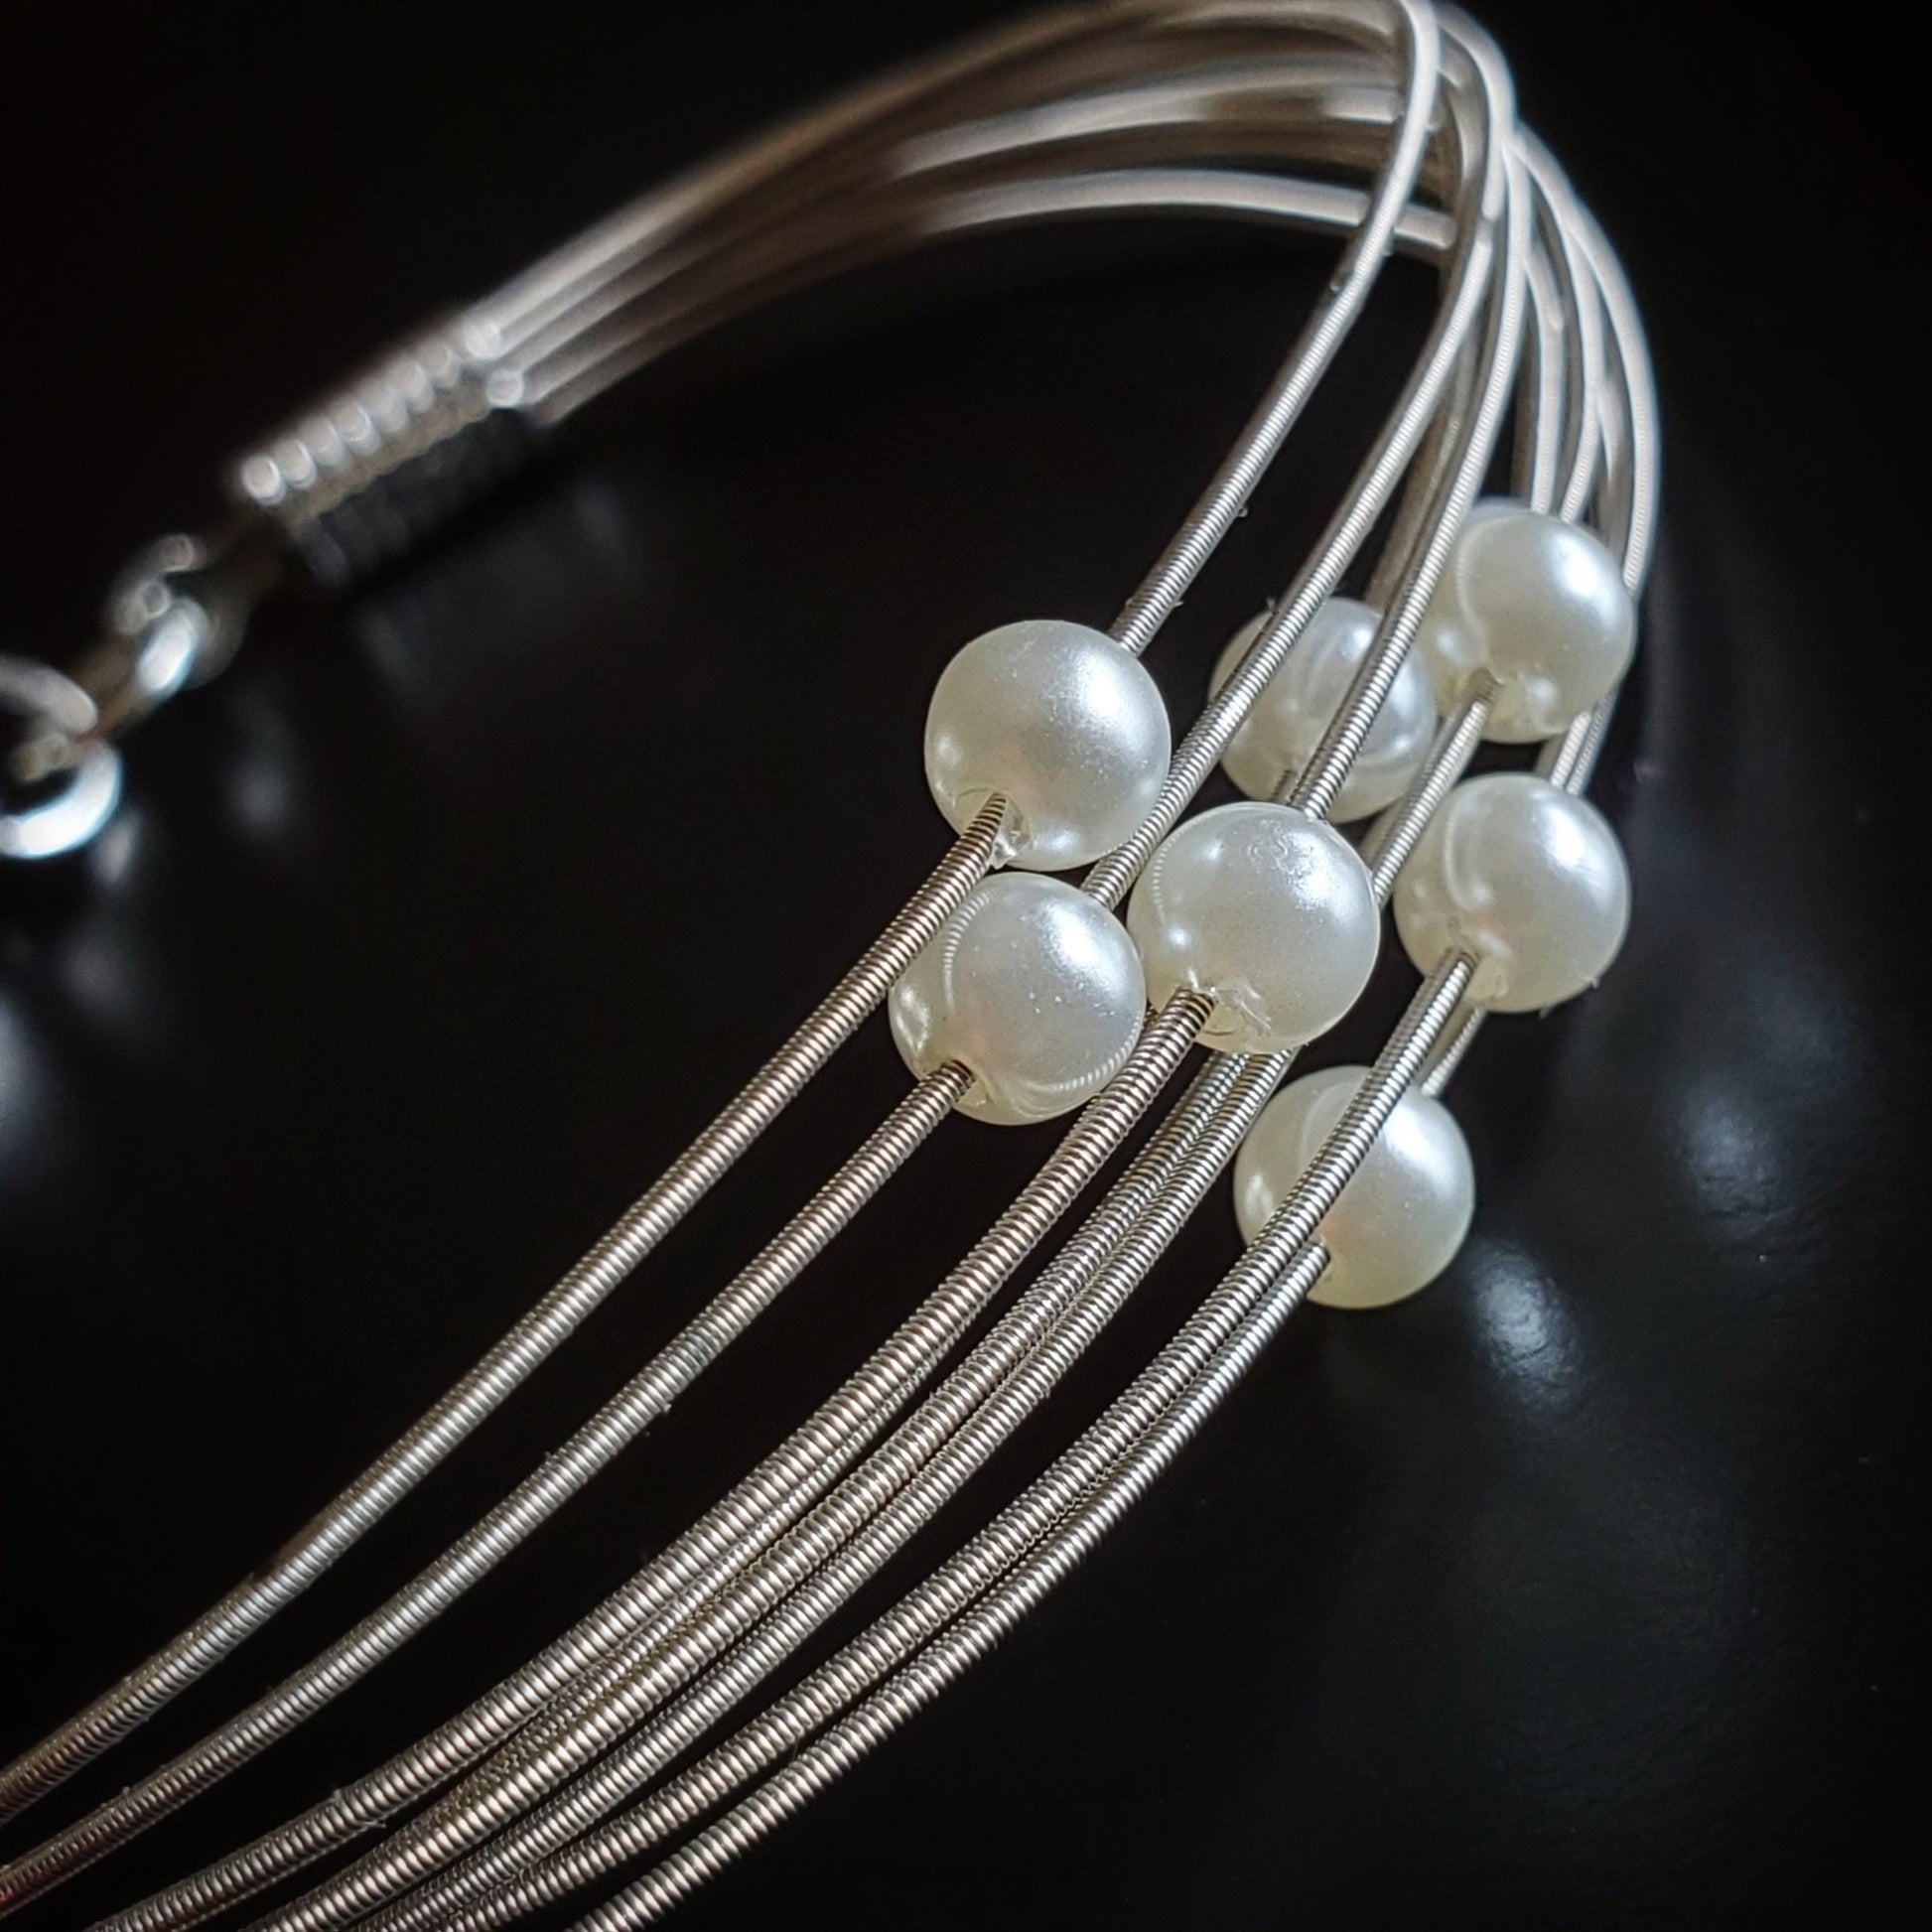 close-up of clasp style bracelet made from several strands of upcycled guitar strings on each one is a white glass bead